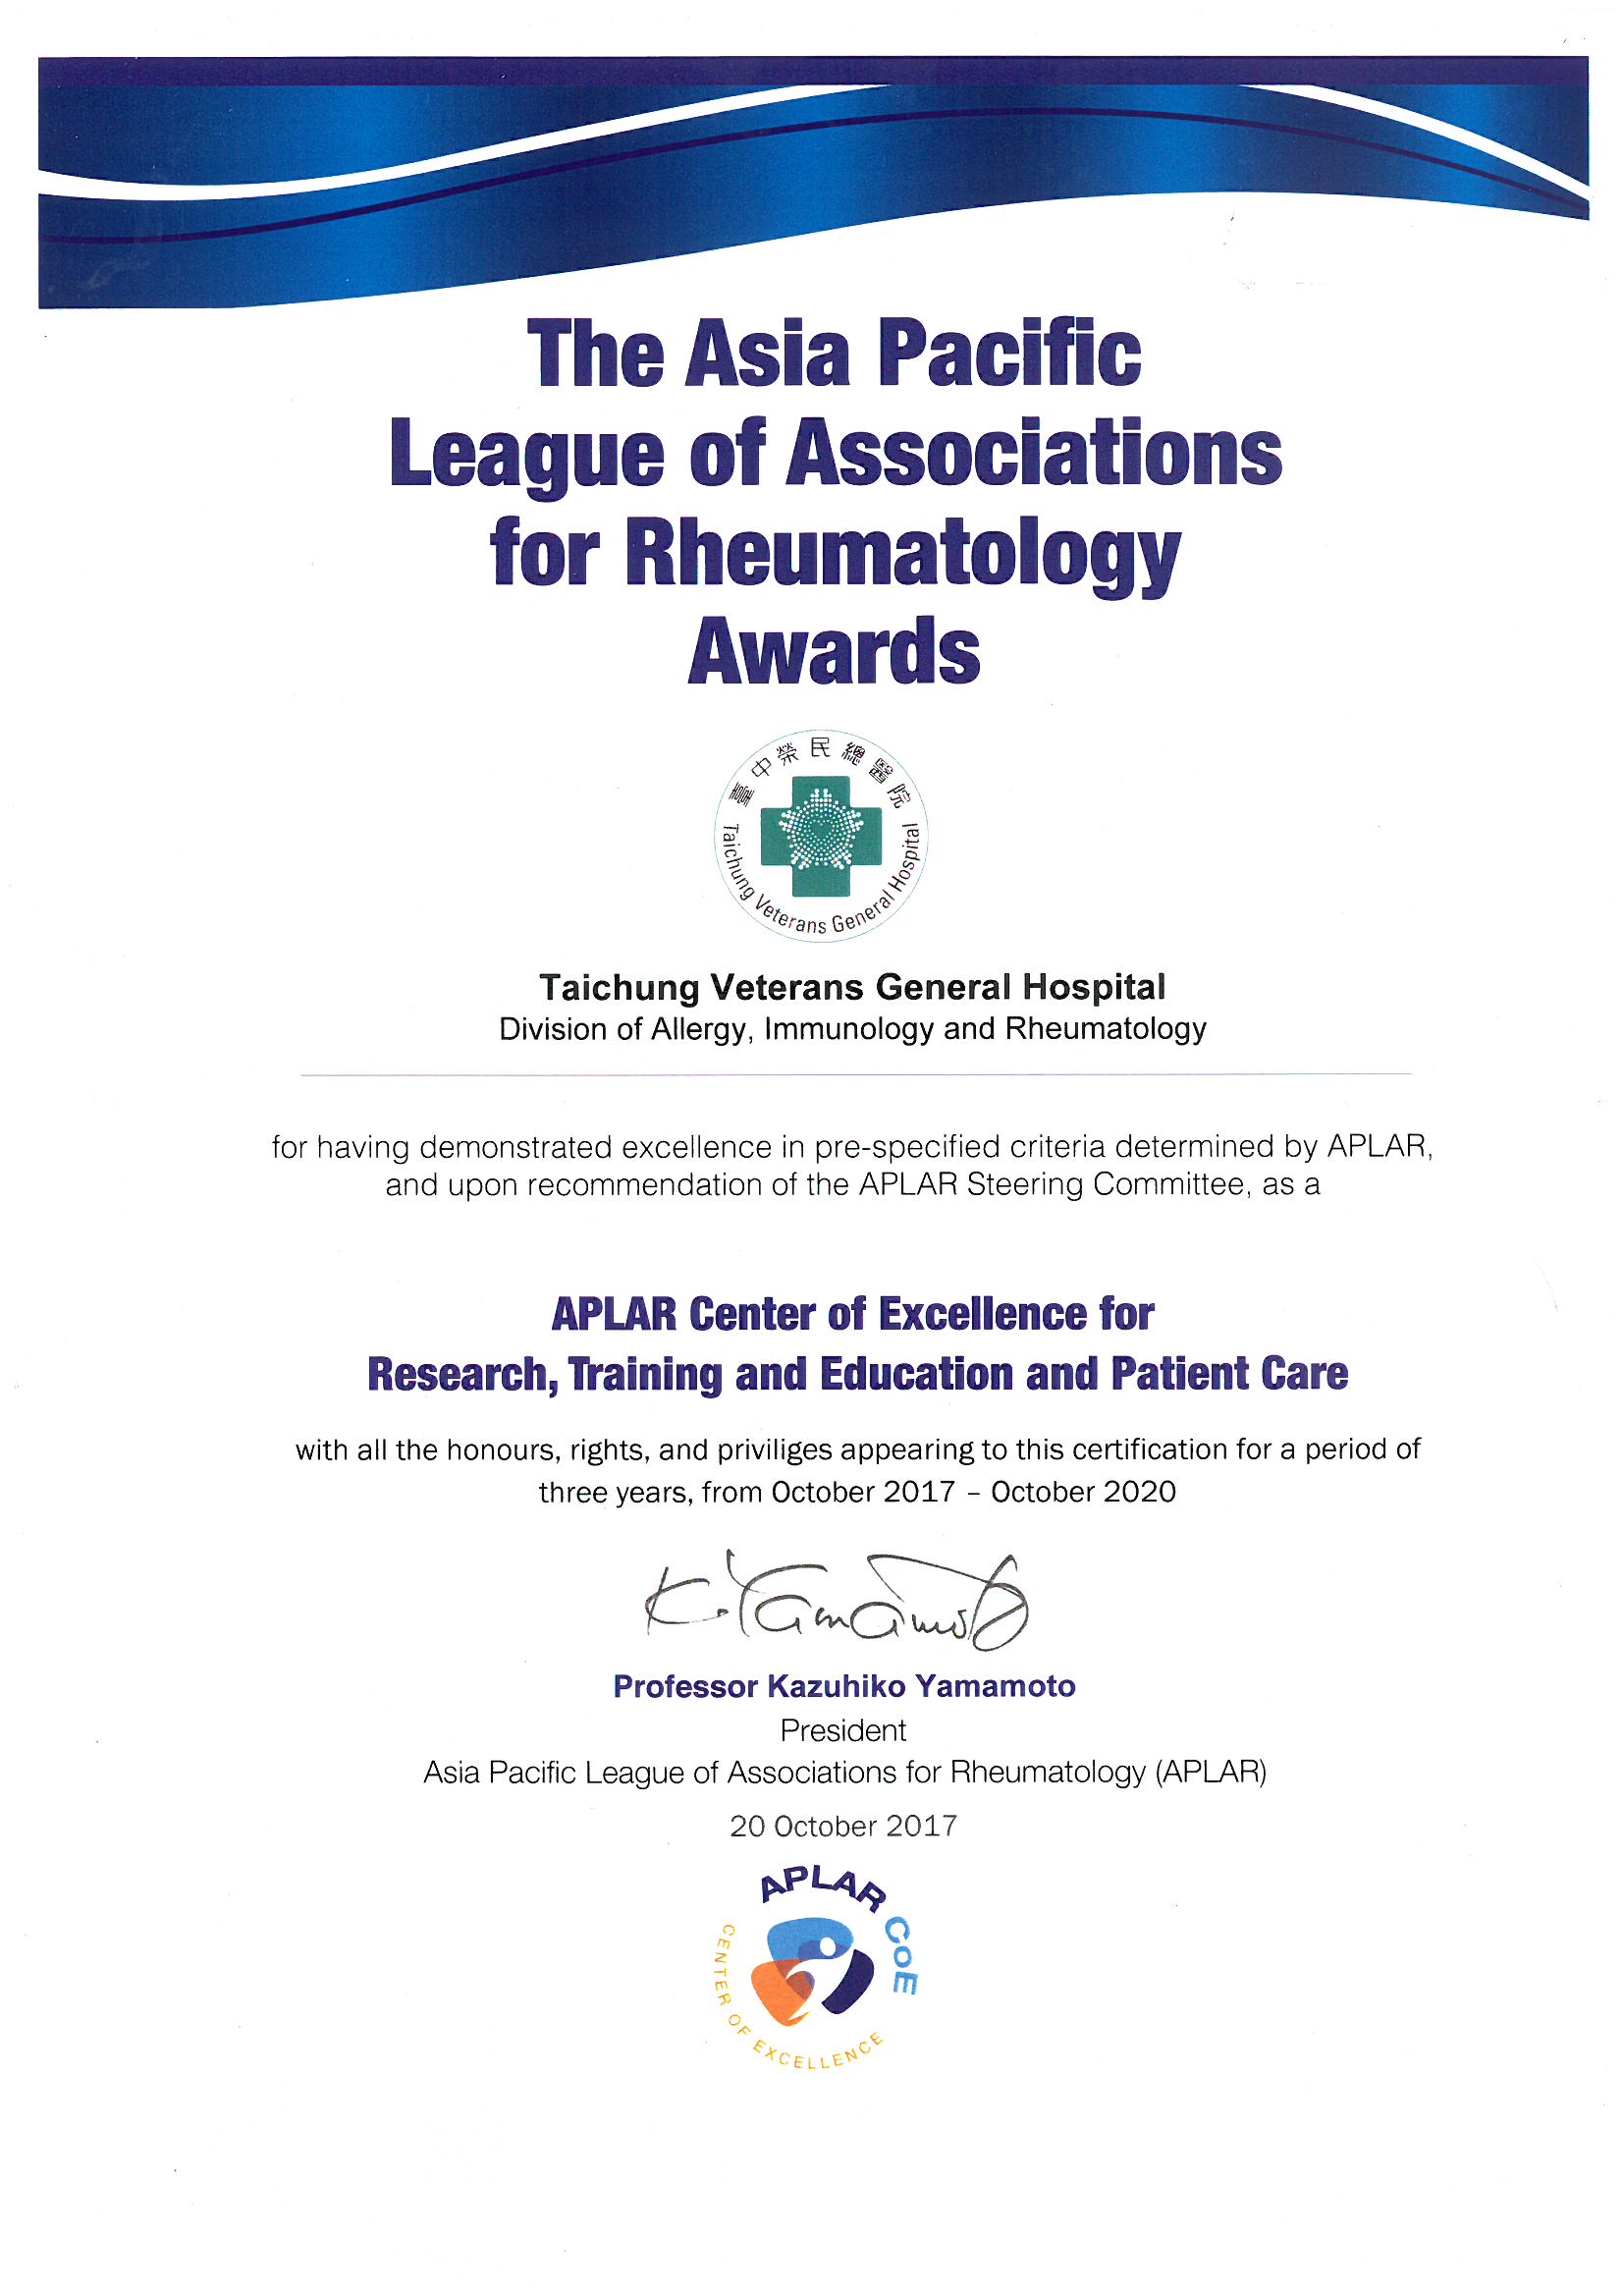 APLAR Center of Excellence by the Asia Pacific League of Associations for Rheumatology